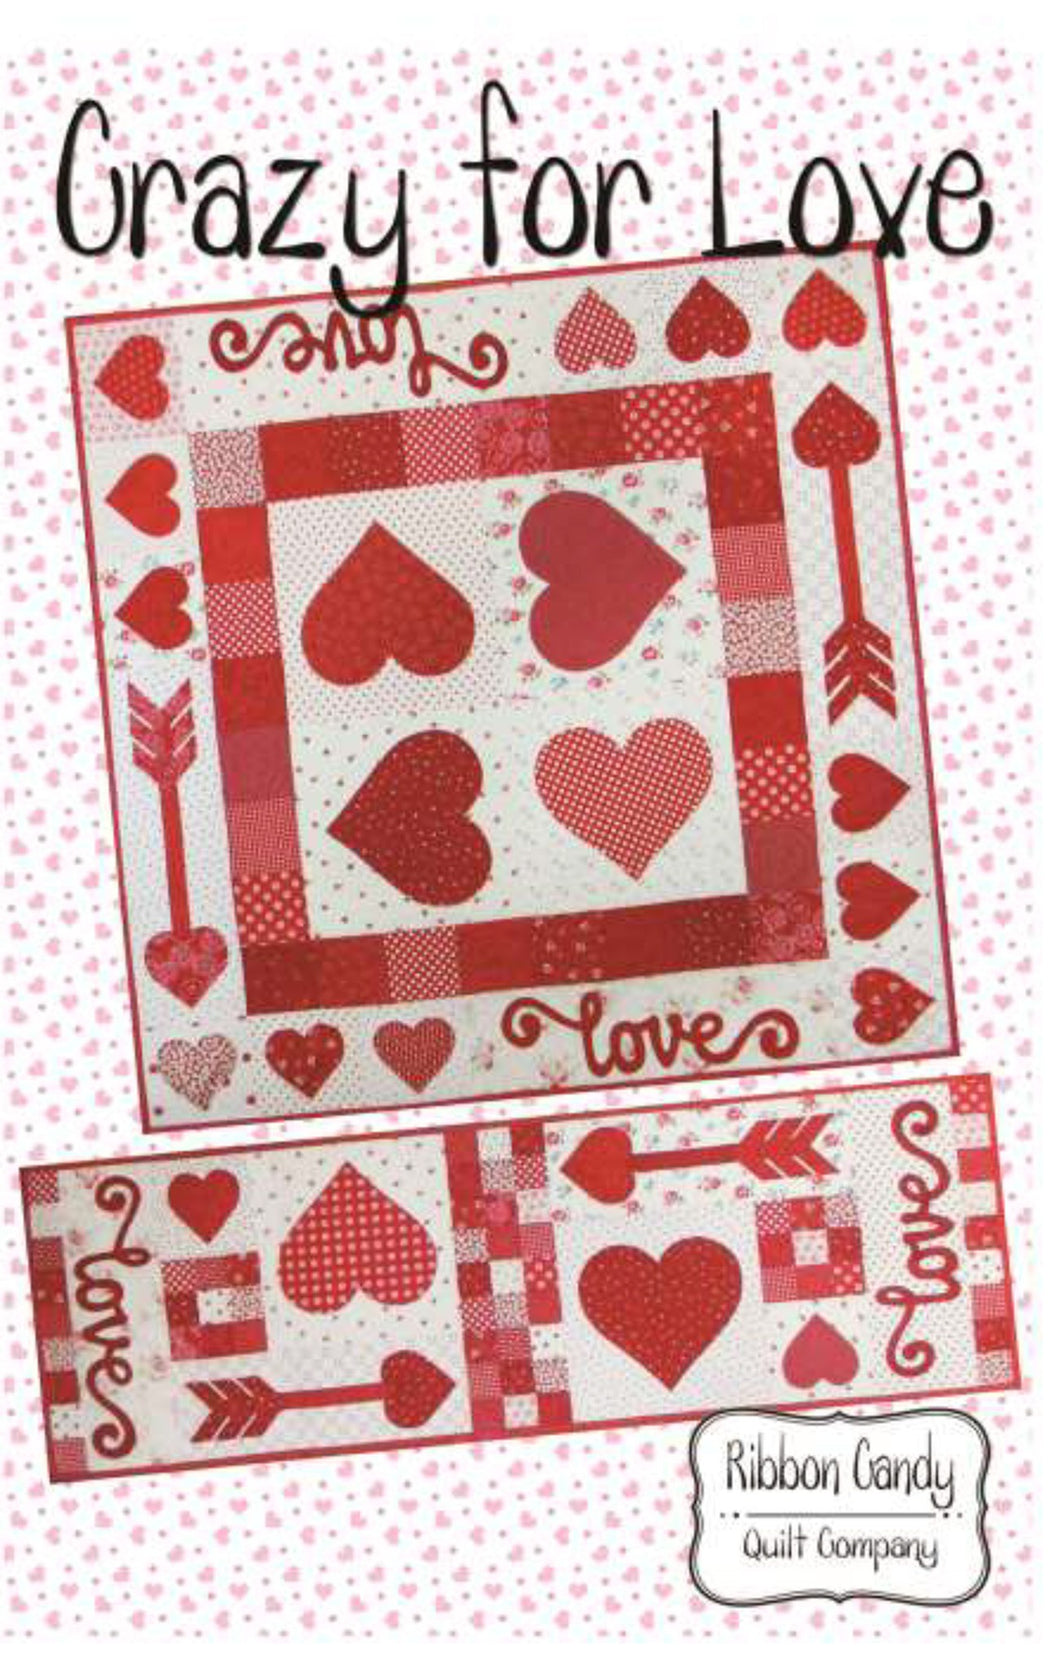 Ribbon Candy Quilt Company Crazy for Love pattern